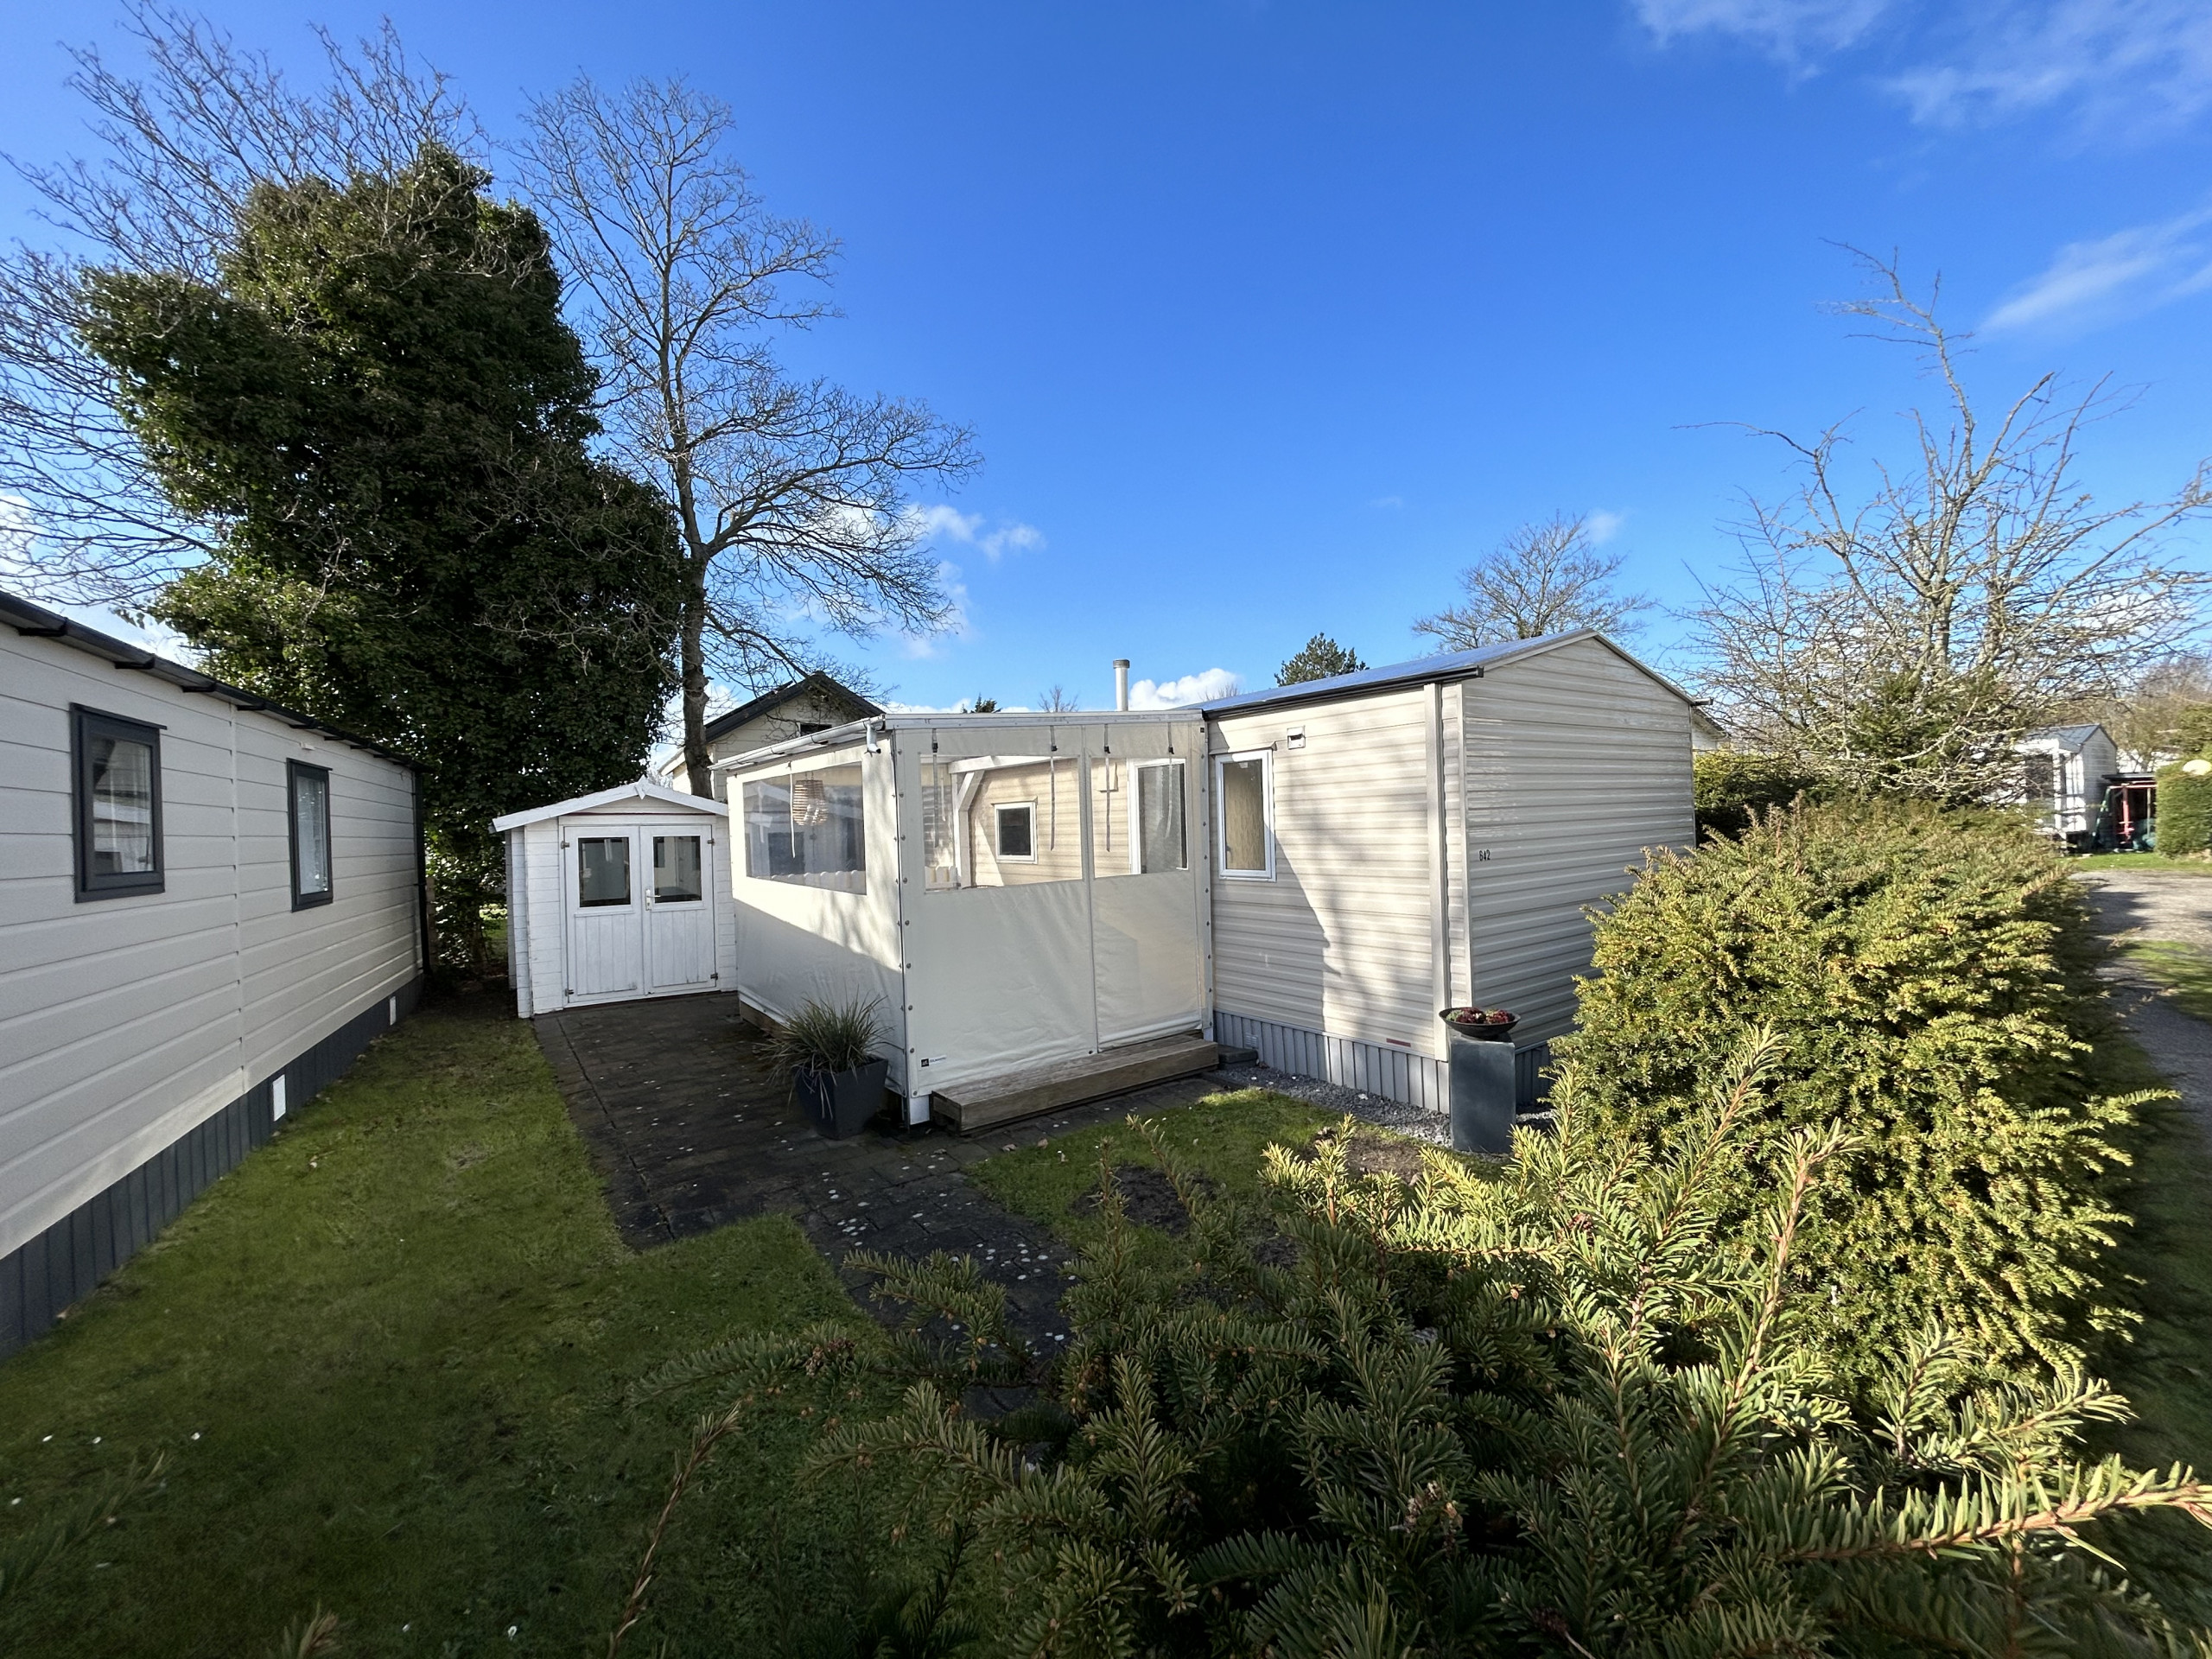 Holiday Home For 4 - Walcheren